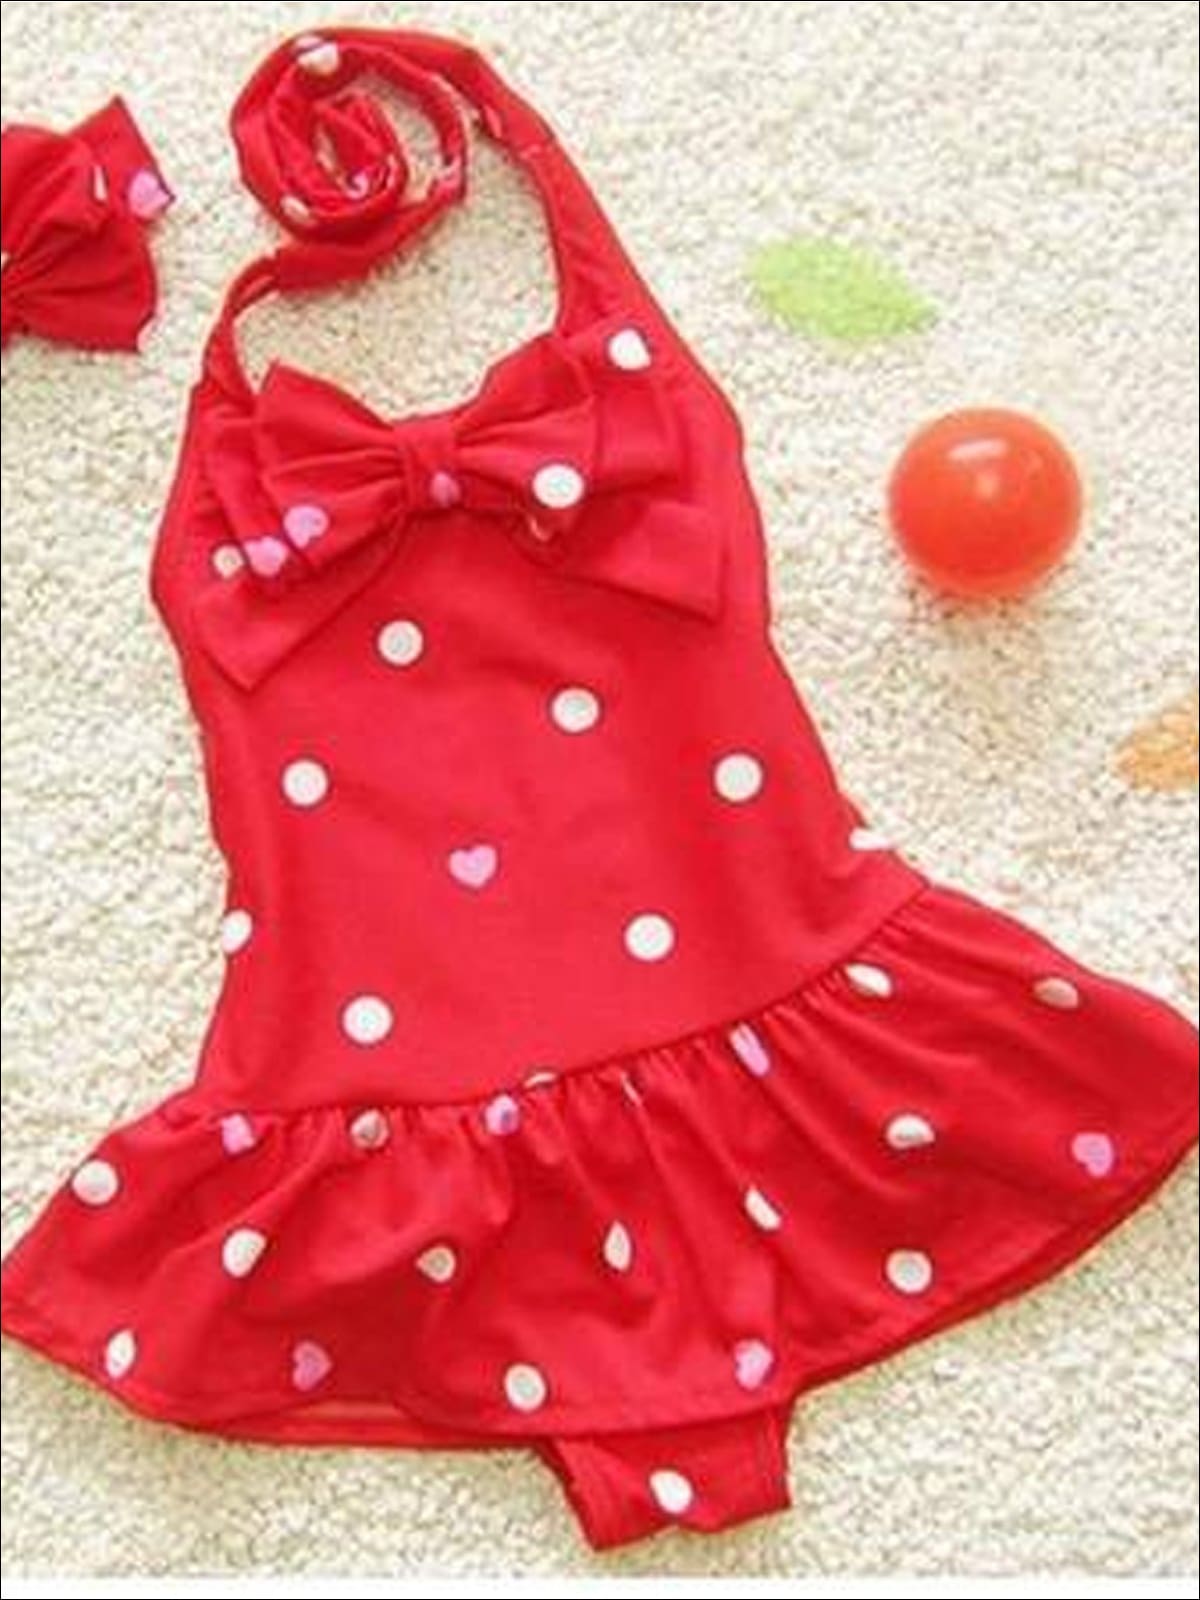 Girls Skirted Polka Dot & Heart One Piece Halter Swimsuit with Matching Headband - Girls One Piece Swimsuit